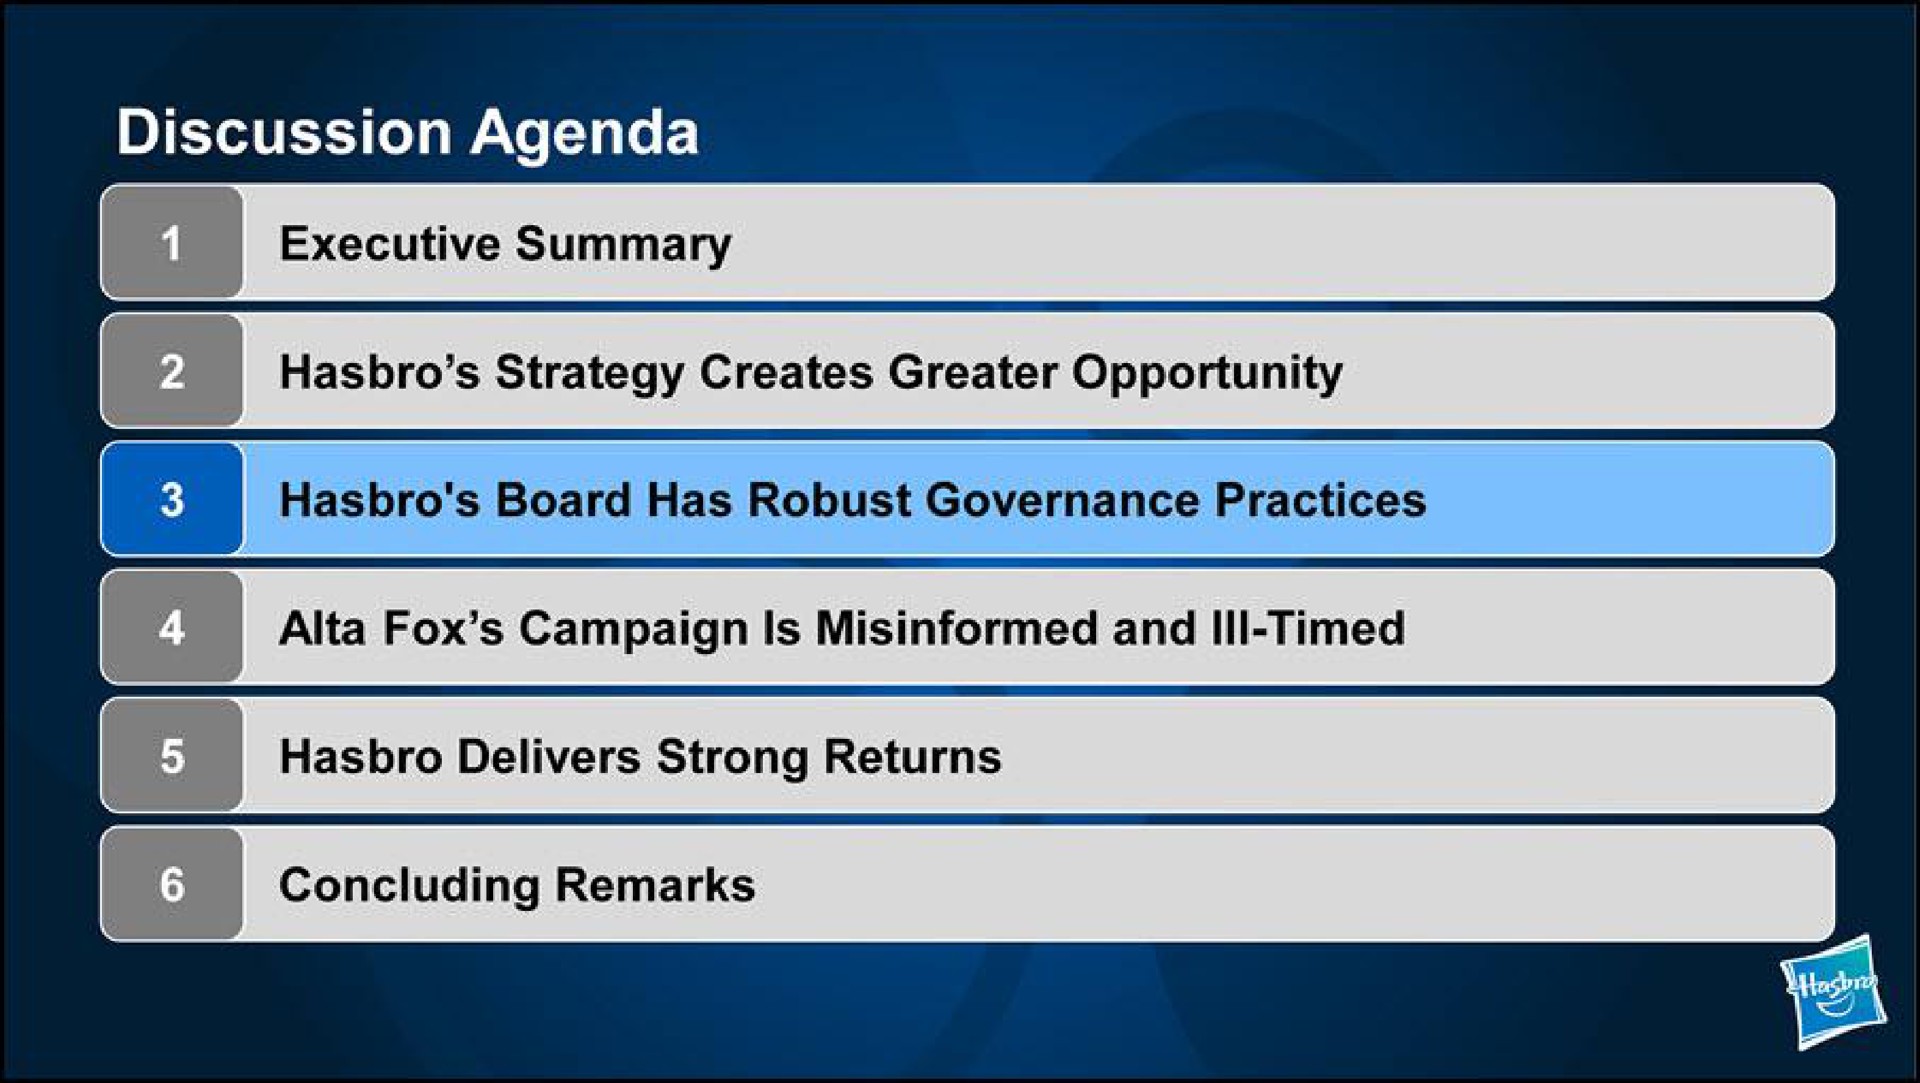 discussion agenda executive summary strategy creates greater opportunity board has robust governance practices delivers strong returns fox campaign is misinformed and ill timed concluding remarks | Hasbro